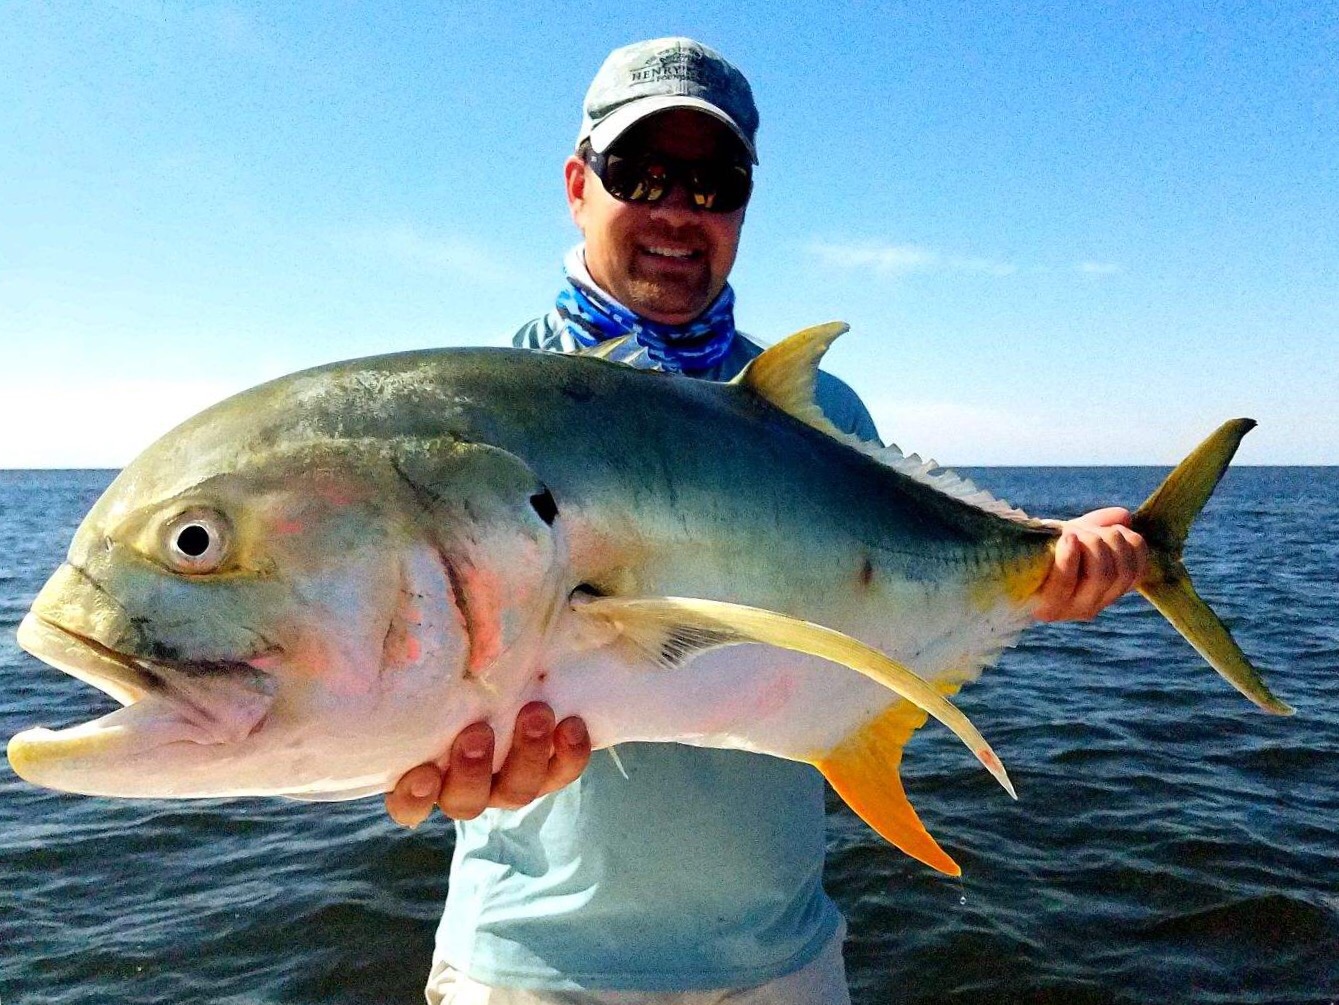 Man with a large fish during summer fishing trip